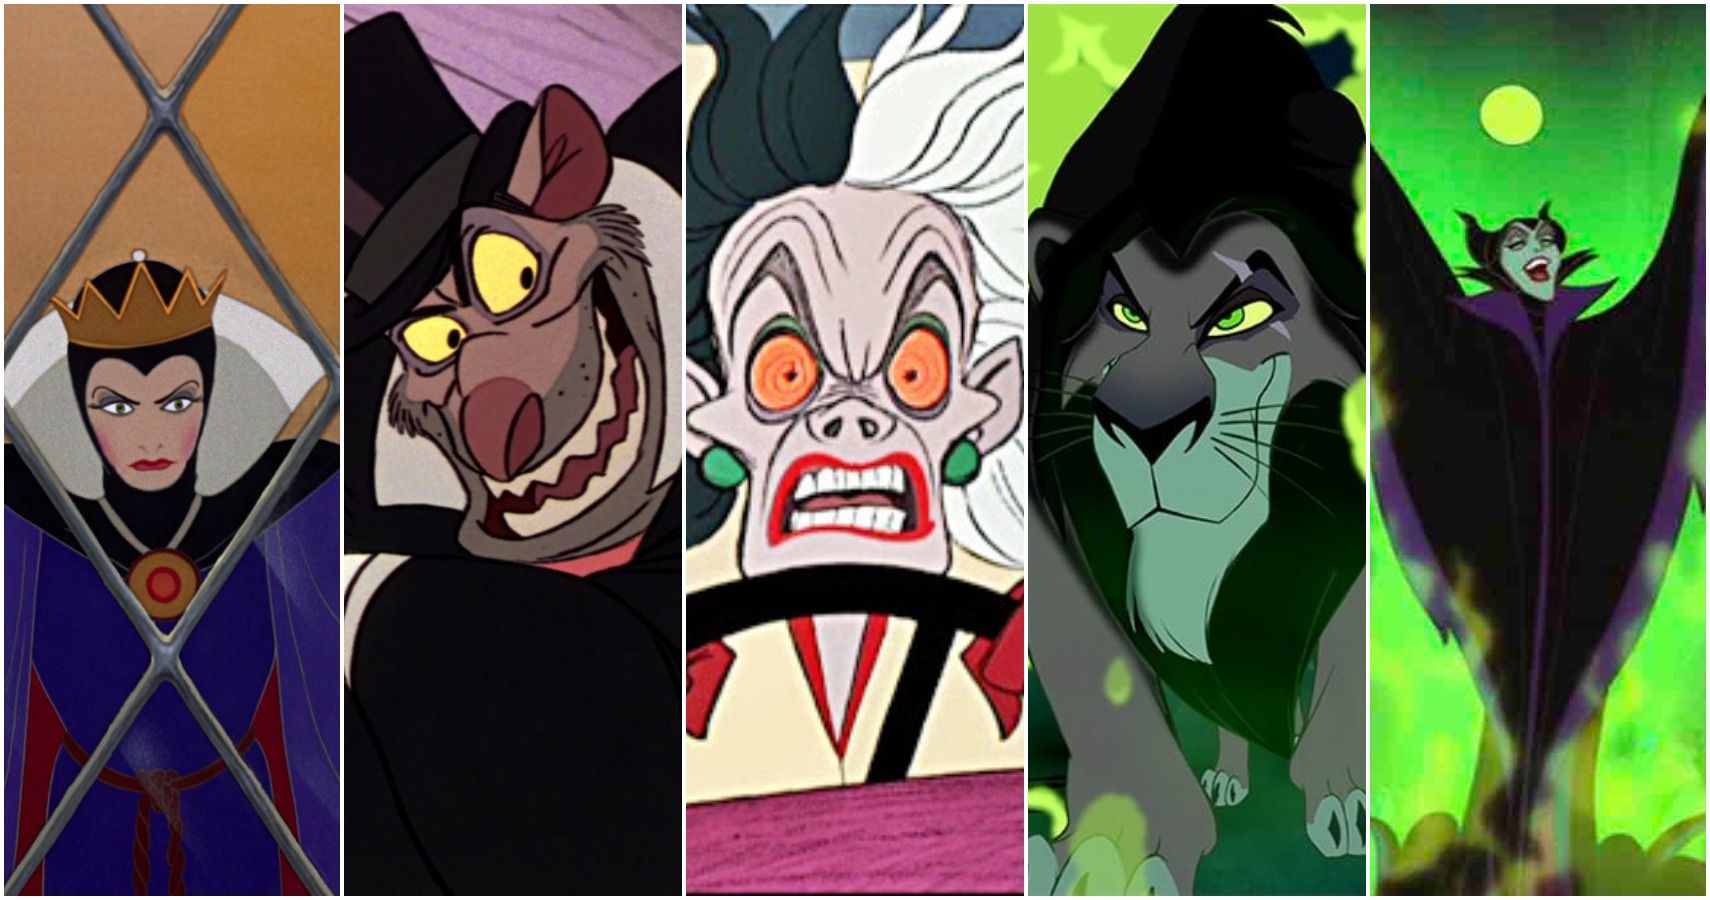 5 Disney Villains Who Get Too Much Credit (& 5 Who Don't Get Enough)